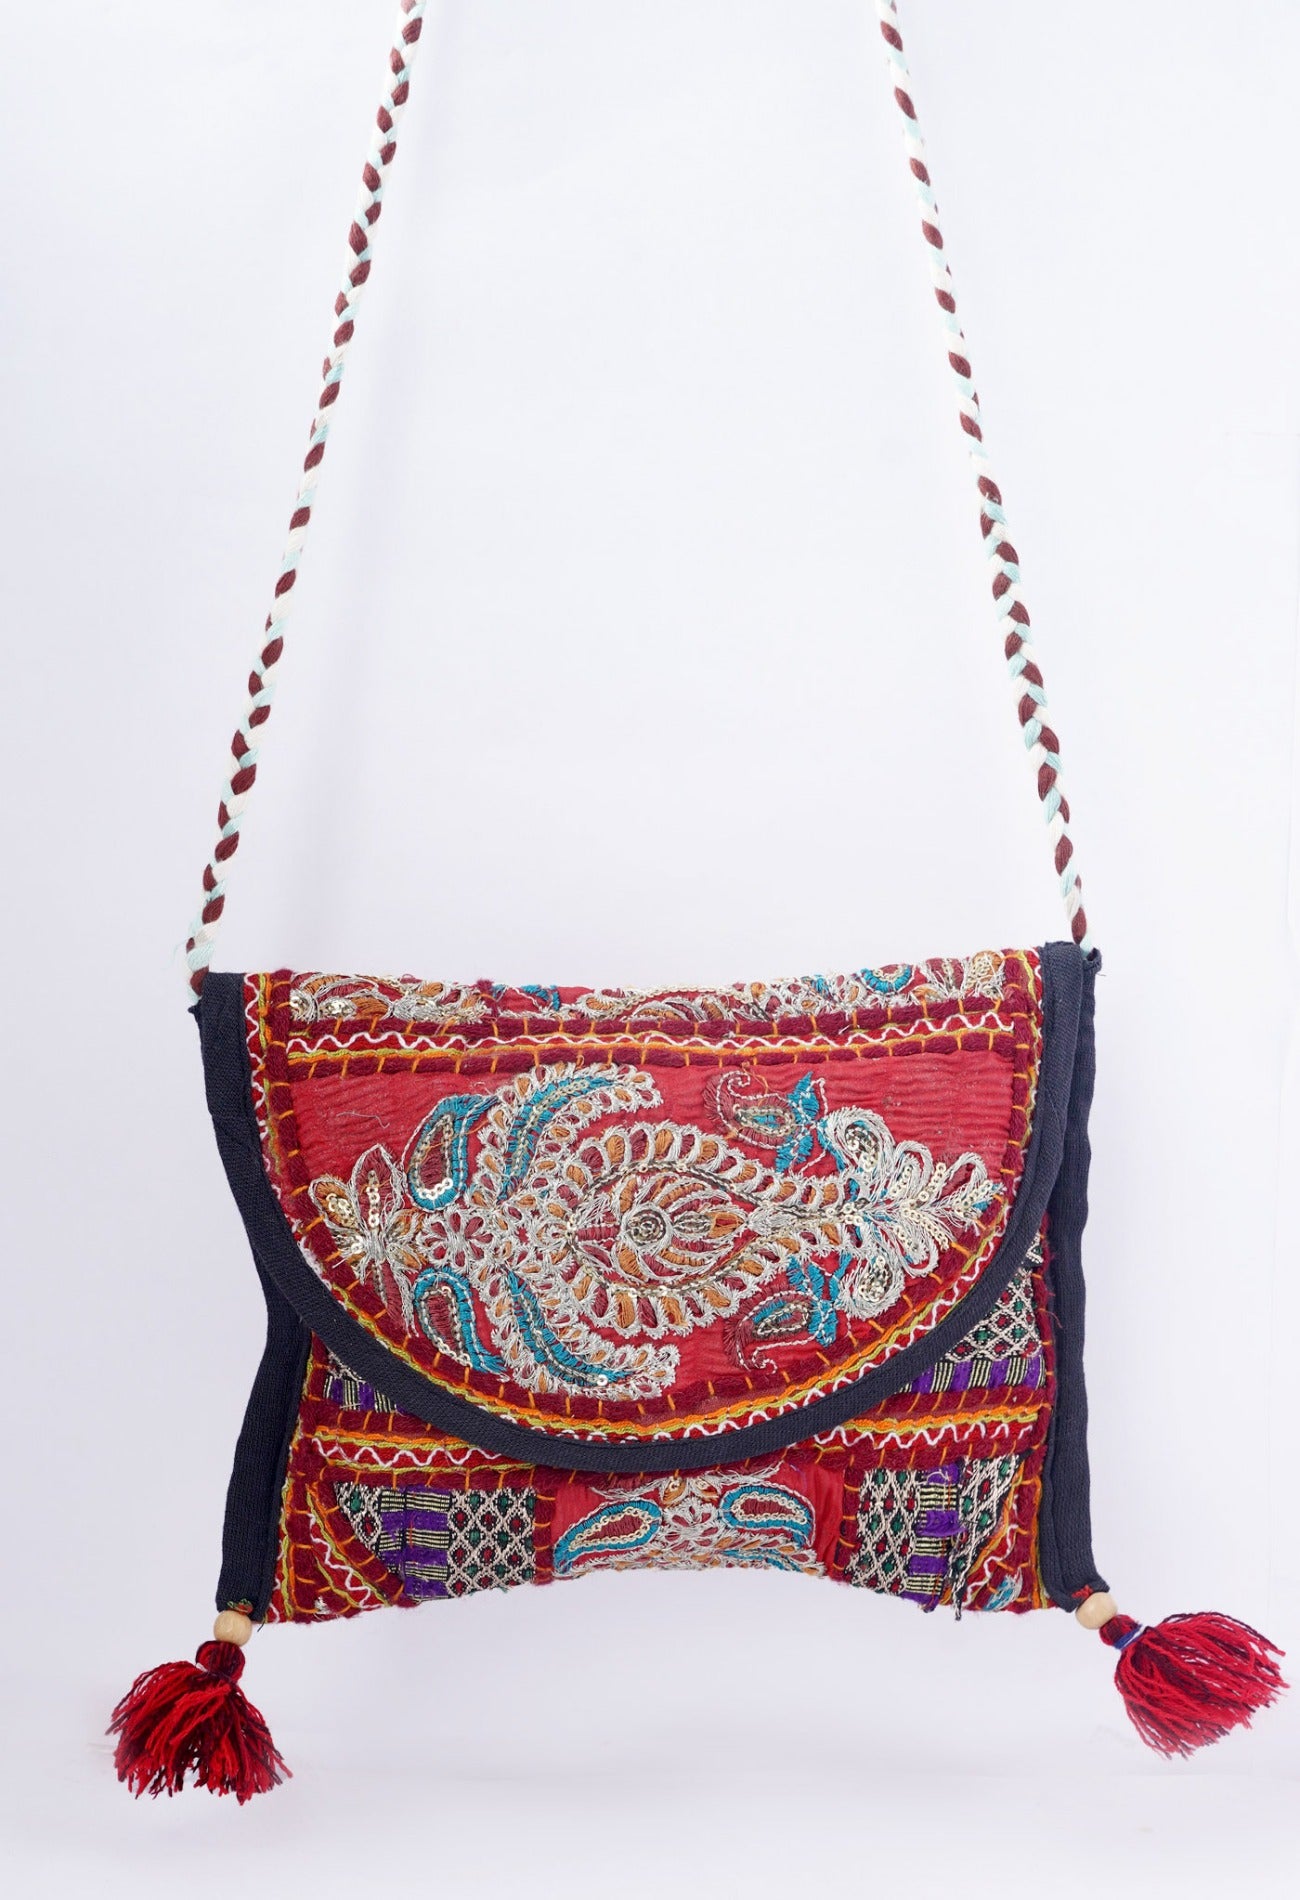 Online Shopping for Red Indian Handicraft Embroidered Hand Bag with Weaving from Rajasthan at Unnatisilks.com India_x000D_
Online Shopping for Red Indian Handicraft Embroidered Hand Bag with Weaving from Rajasthan at Unnatisilks.com India_x000D_
